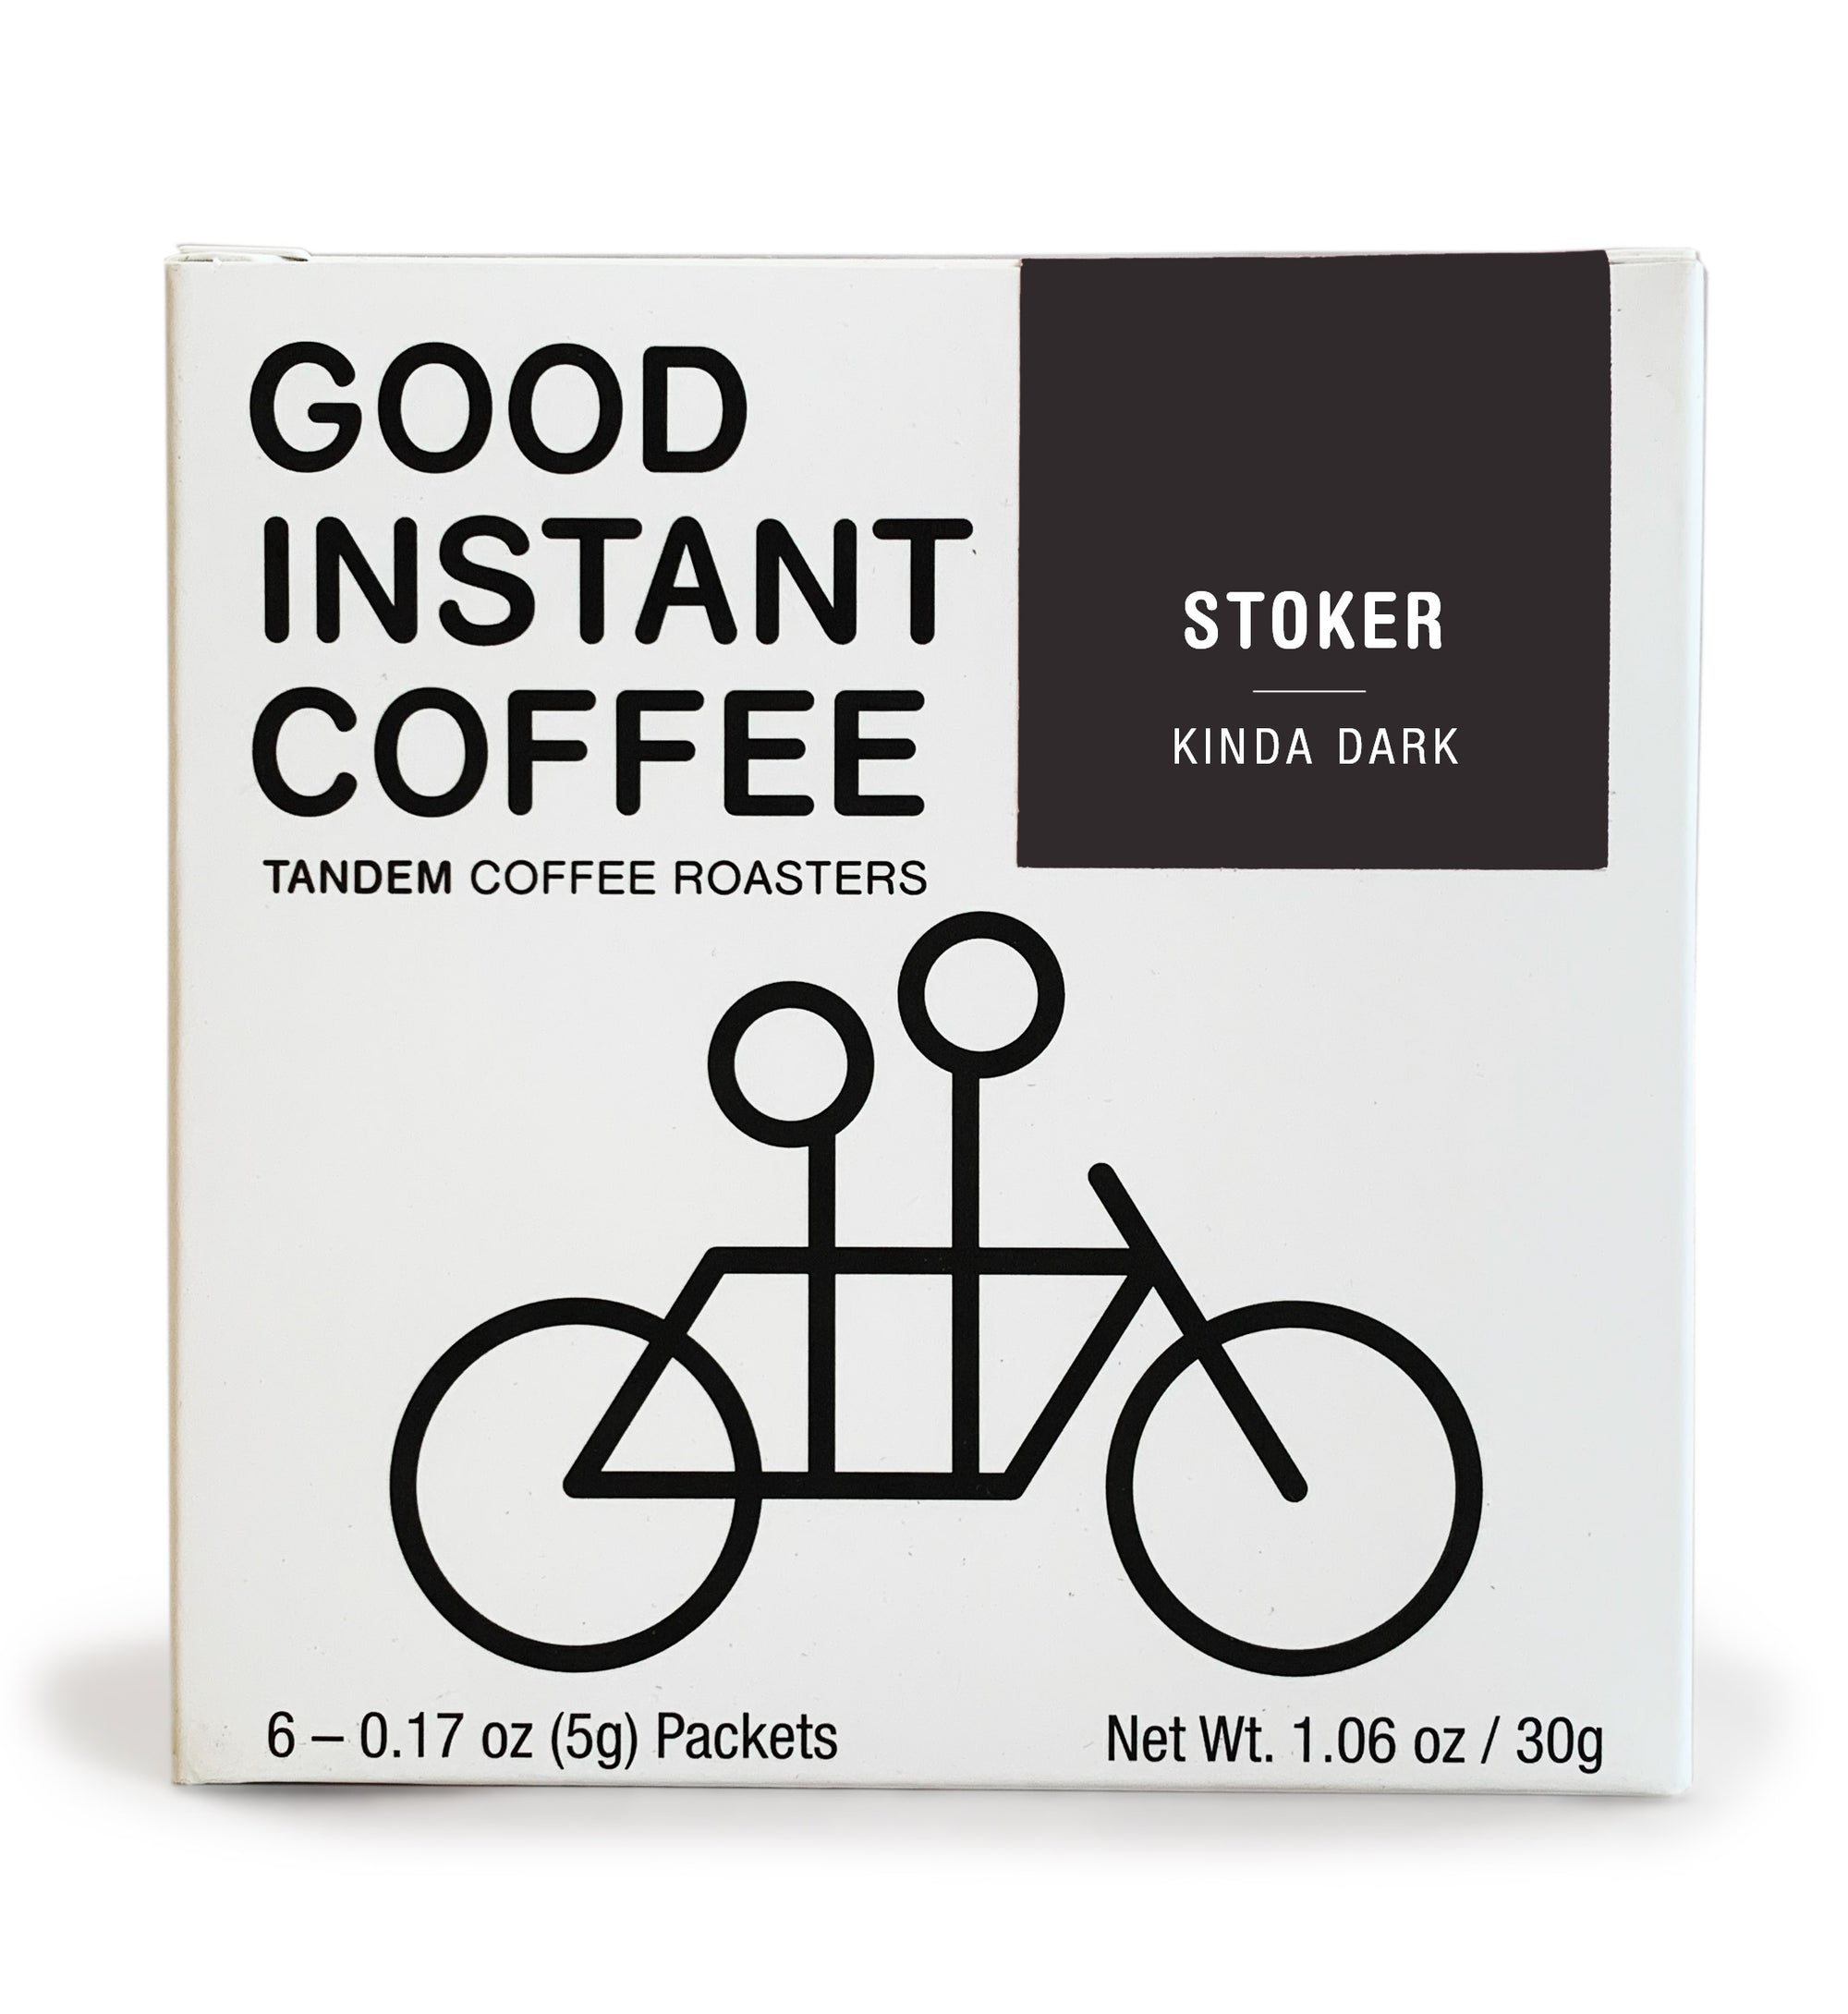 A box of Stoker Instant Coffee from Tandem Coffee Roasters labeled as "Stoker Kinda Dark." Perfect for camping, it features a black graphic of a tandem bicycle on a white